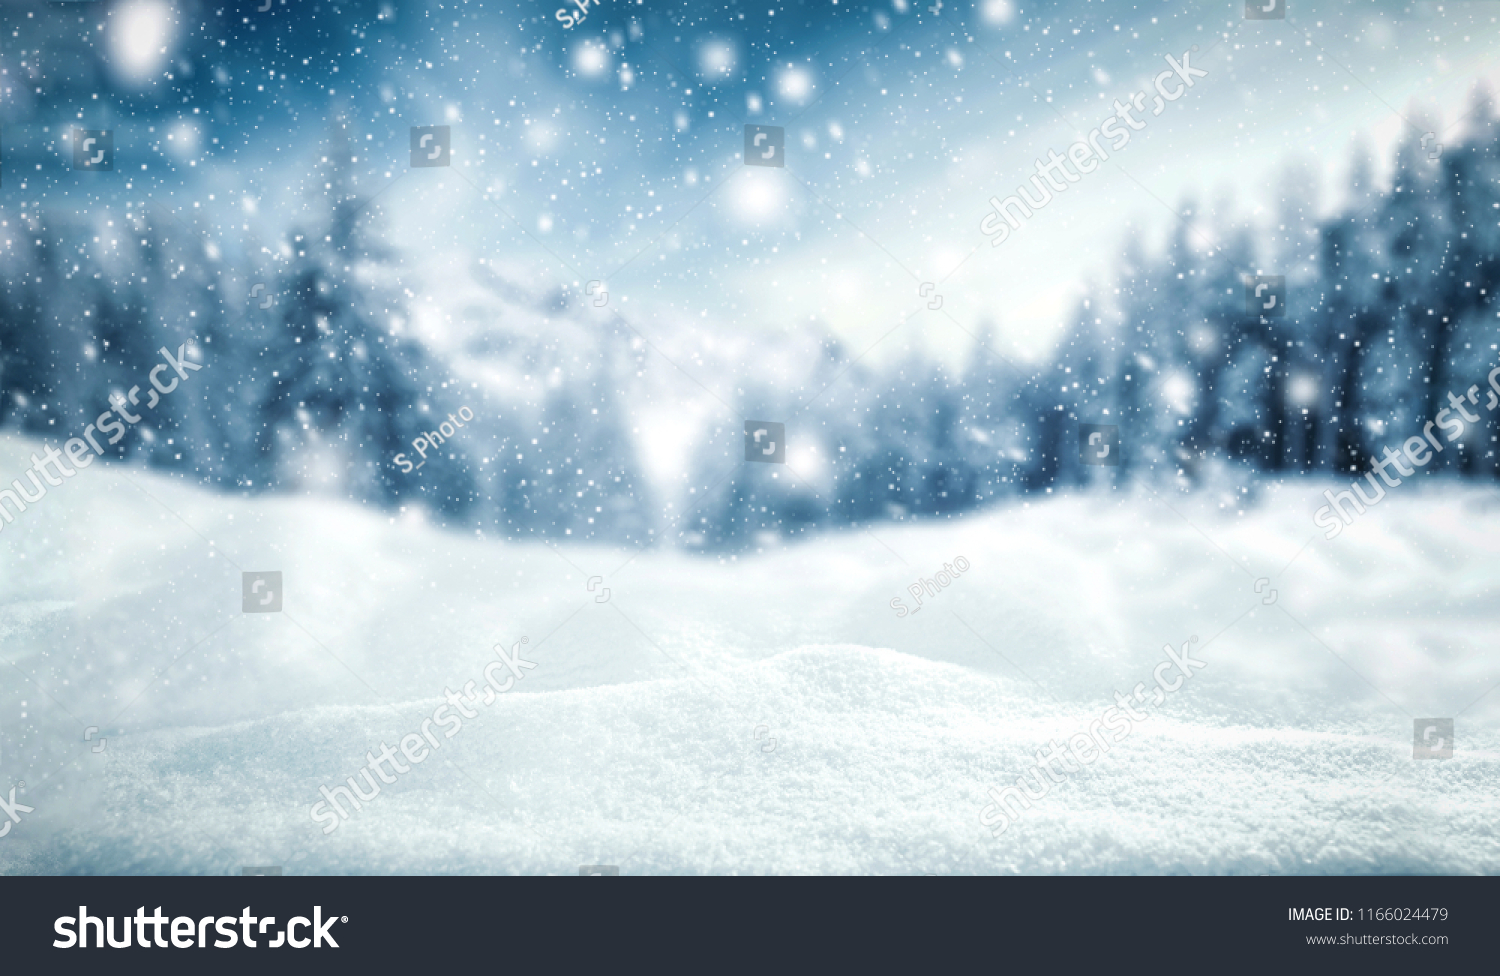 Winter background of snow and frost with free space for your decoration.  #1166024479